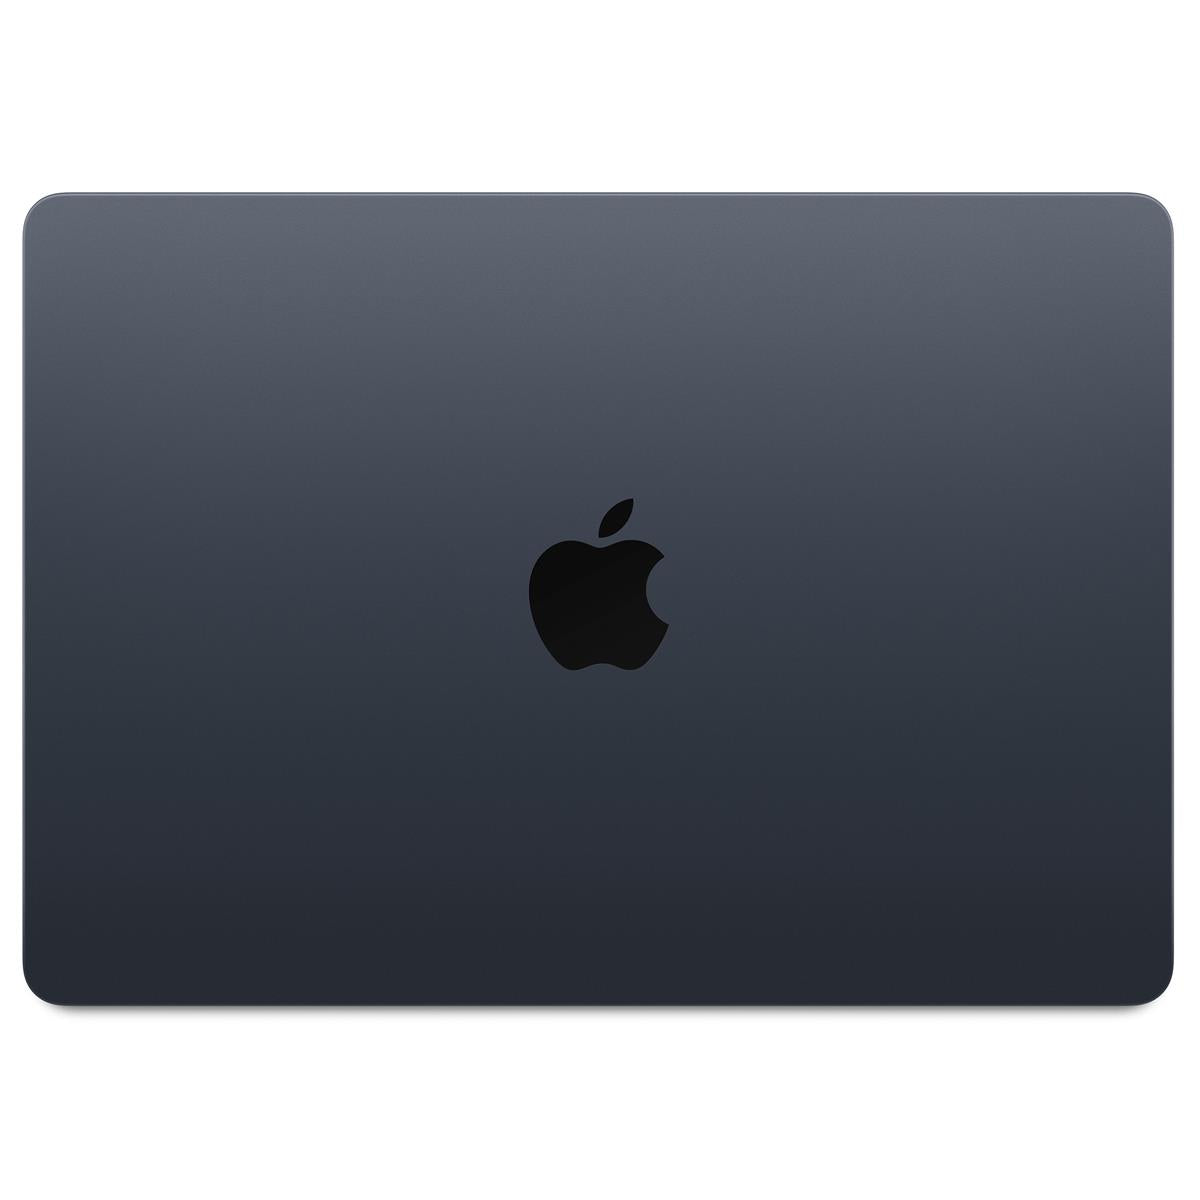 13-inch MacBook Air: Apple M2 chip with 8_core CPU and 10_core GPU, 16GB unified memory - 1TB SSD - 67W Adapter - Midnight